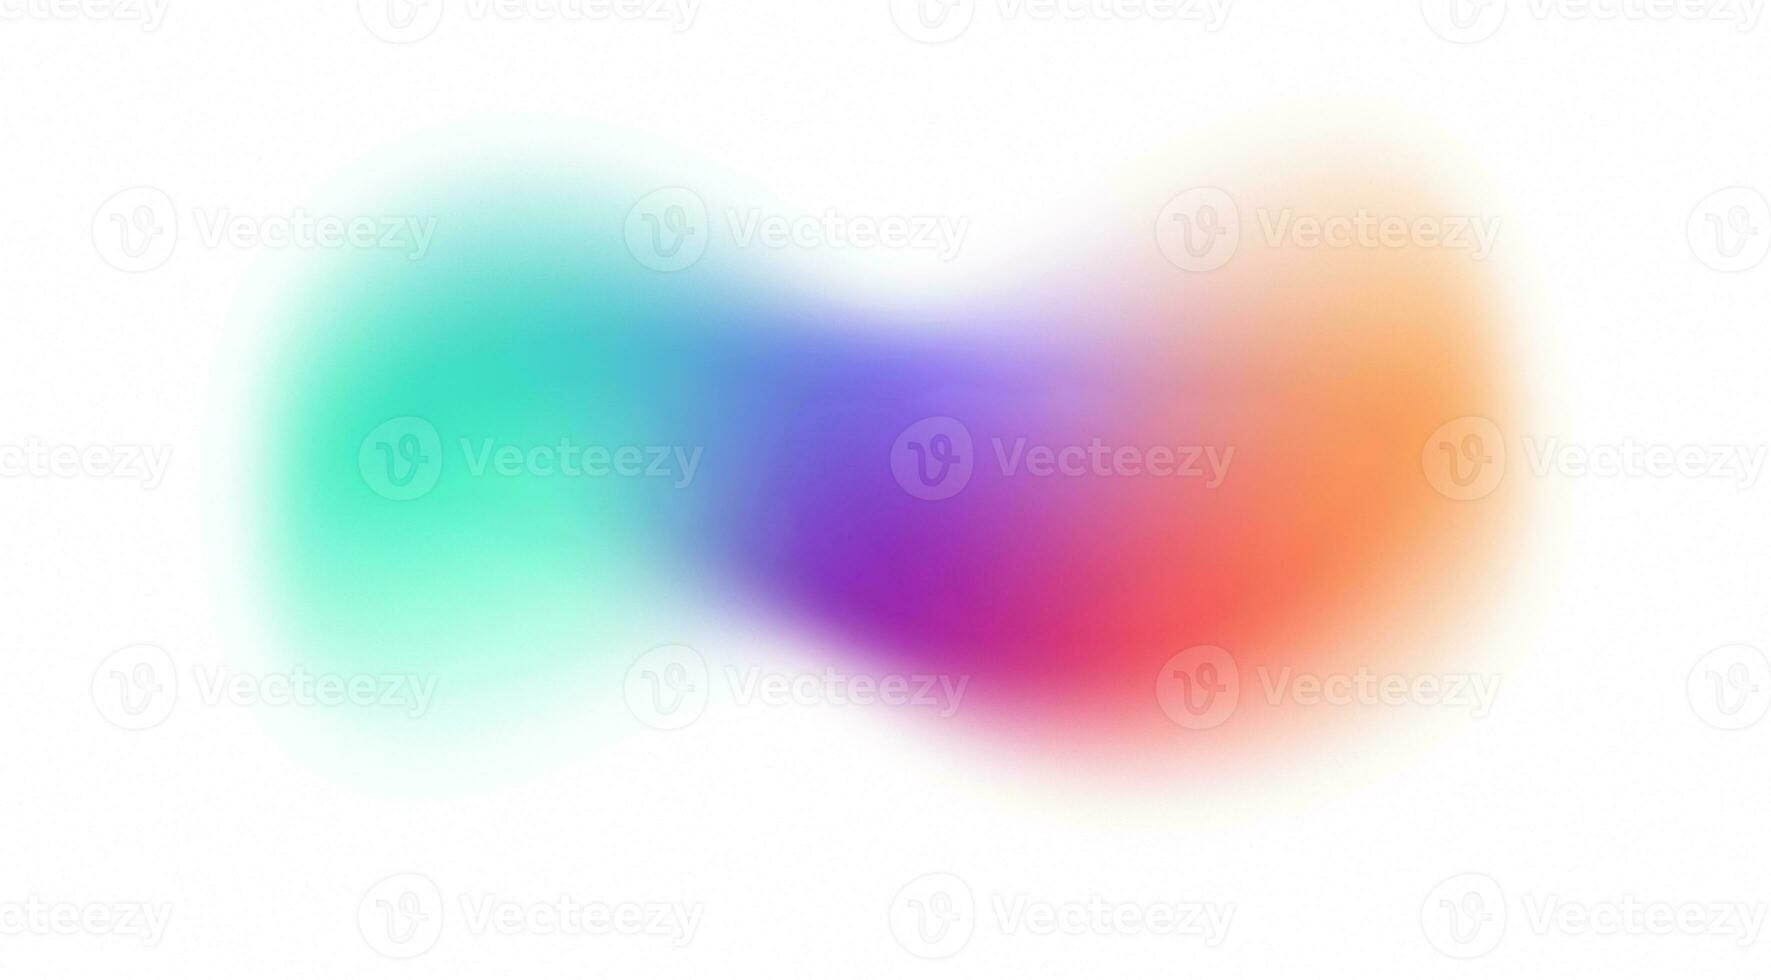 Abstract Blurred Gradient Element photo